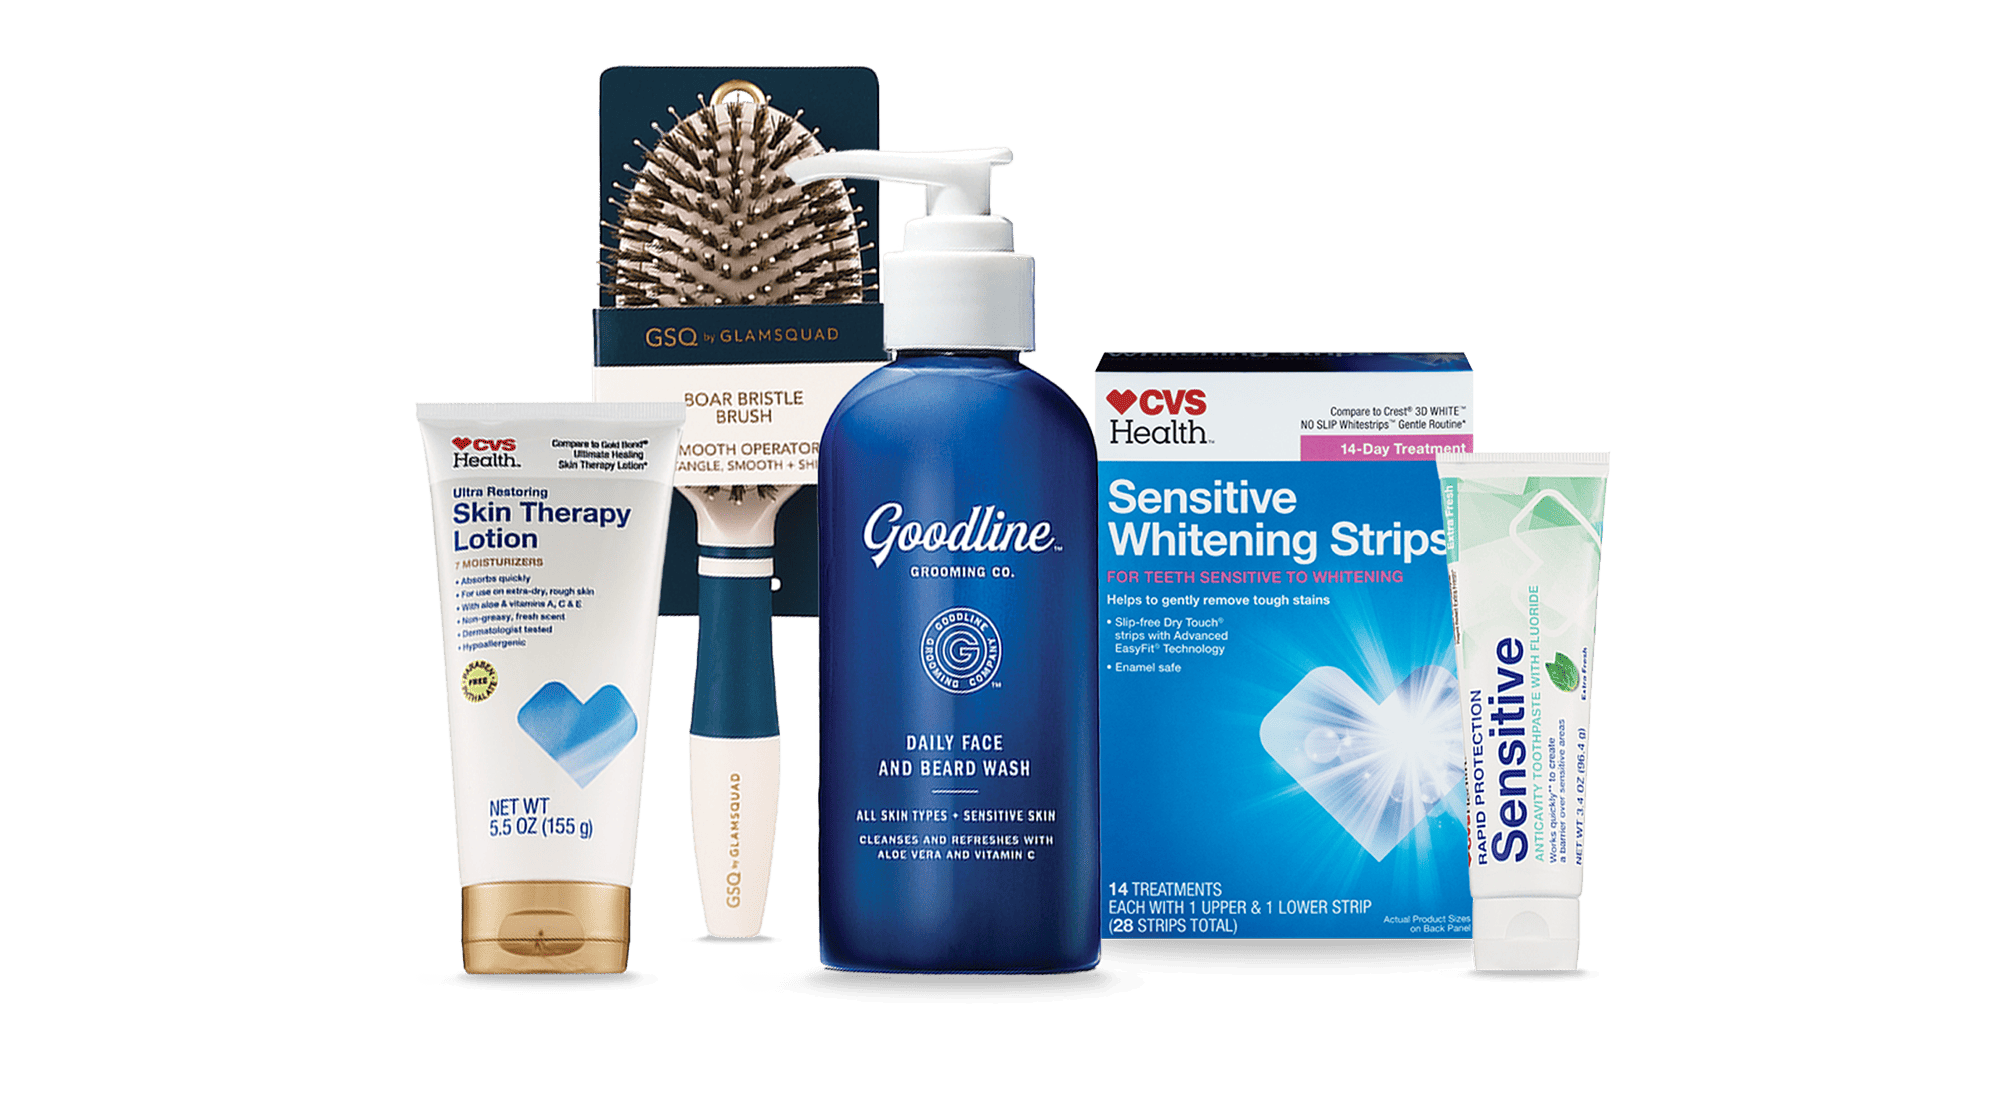 CVS® brand personal care products